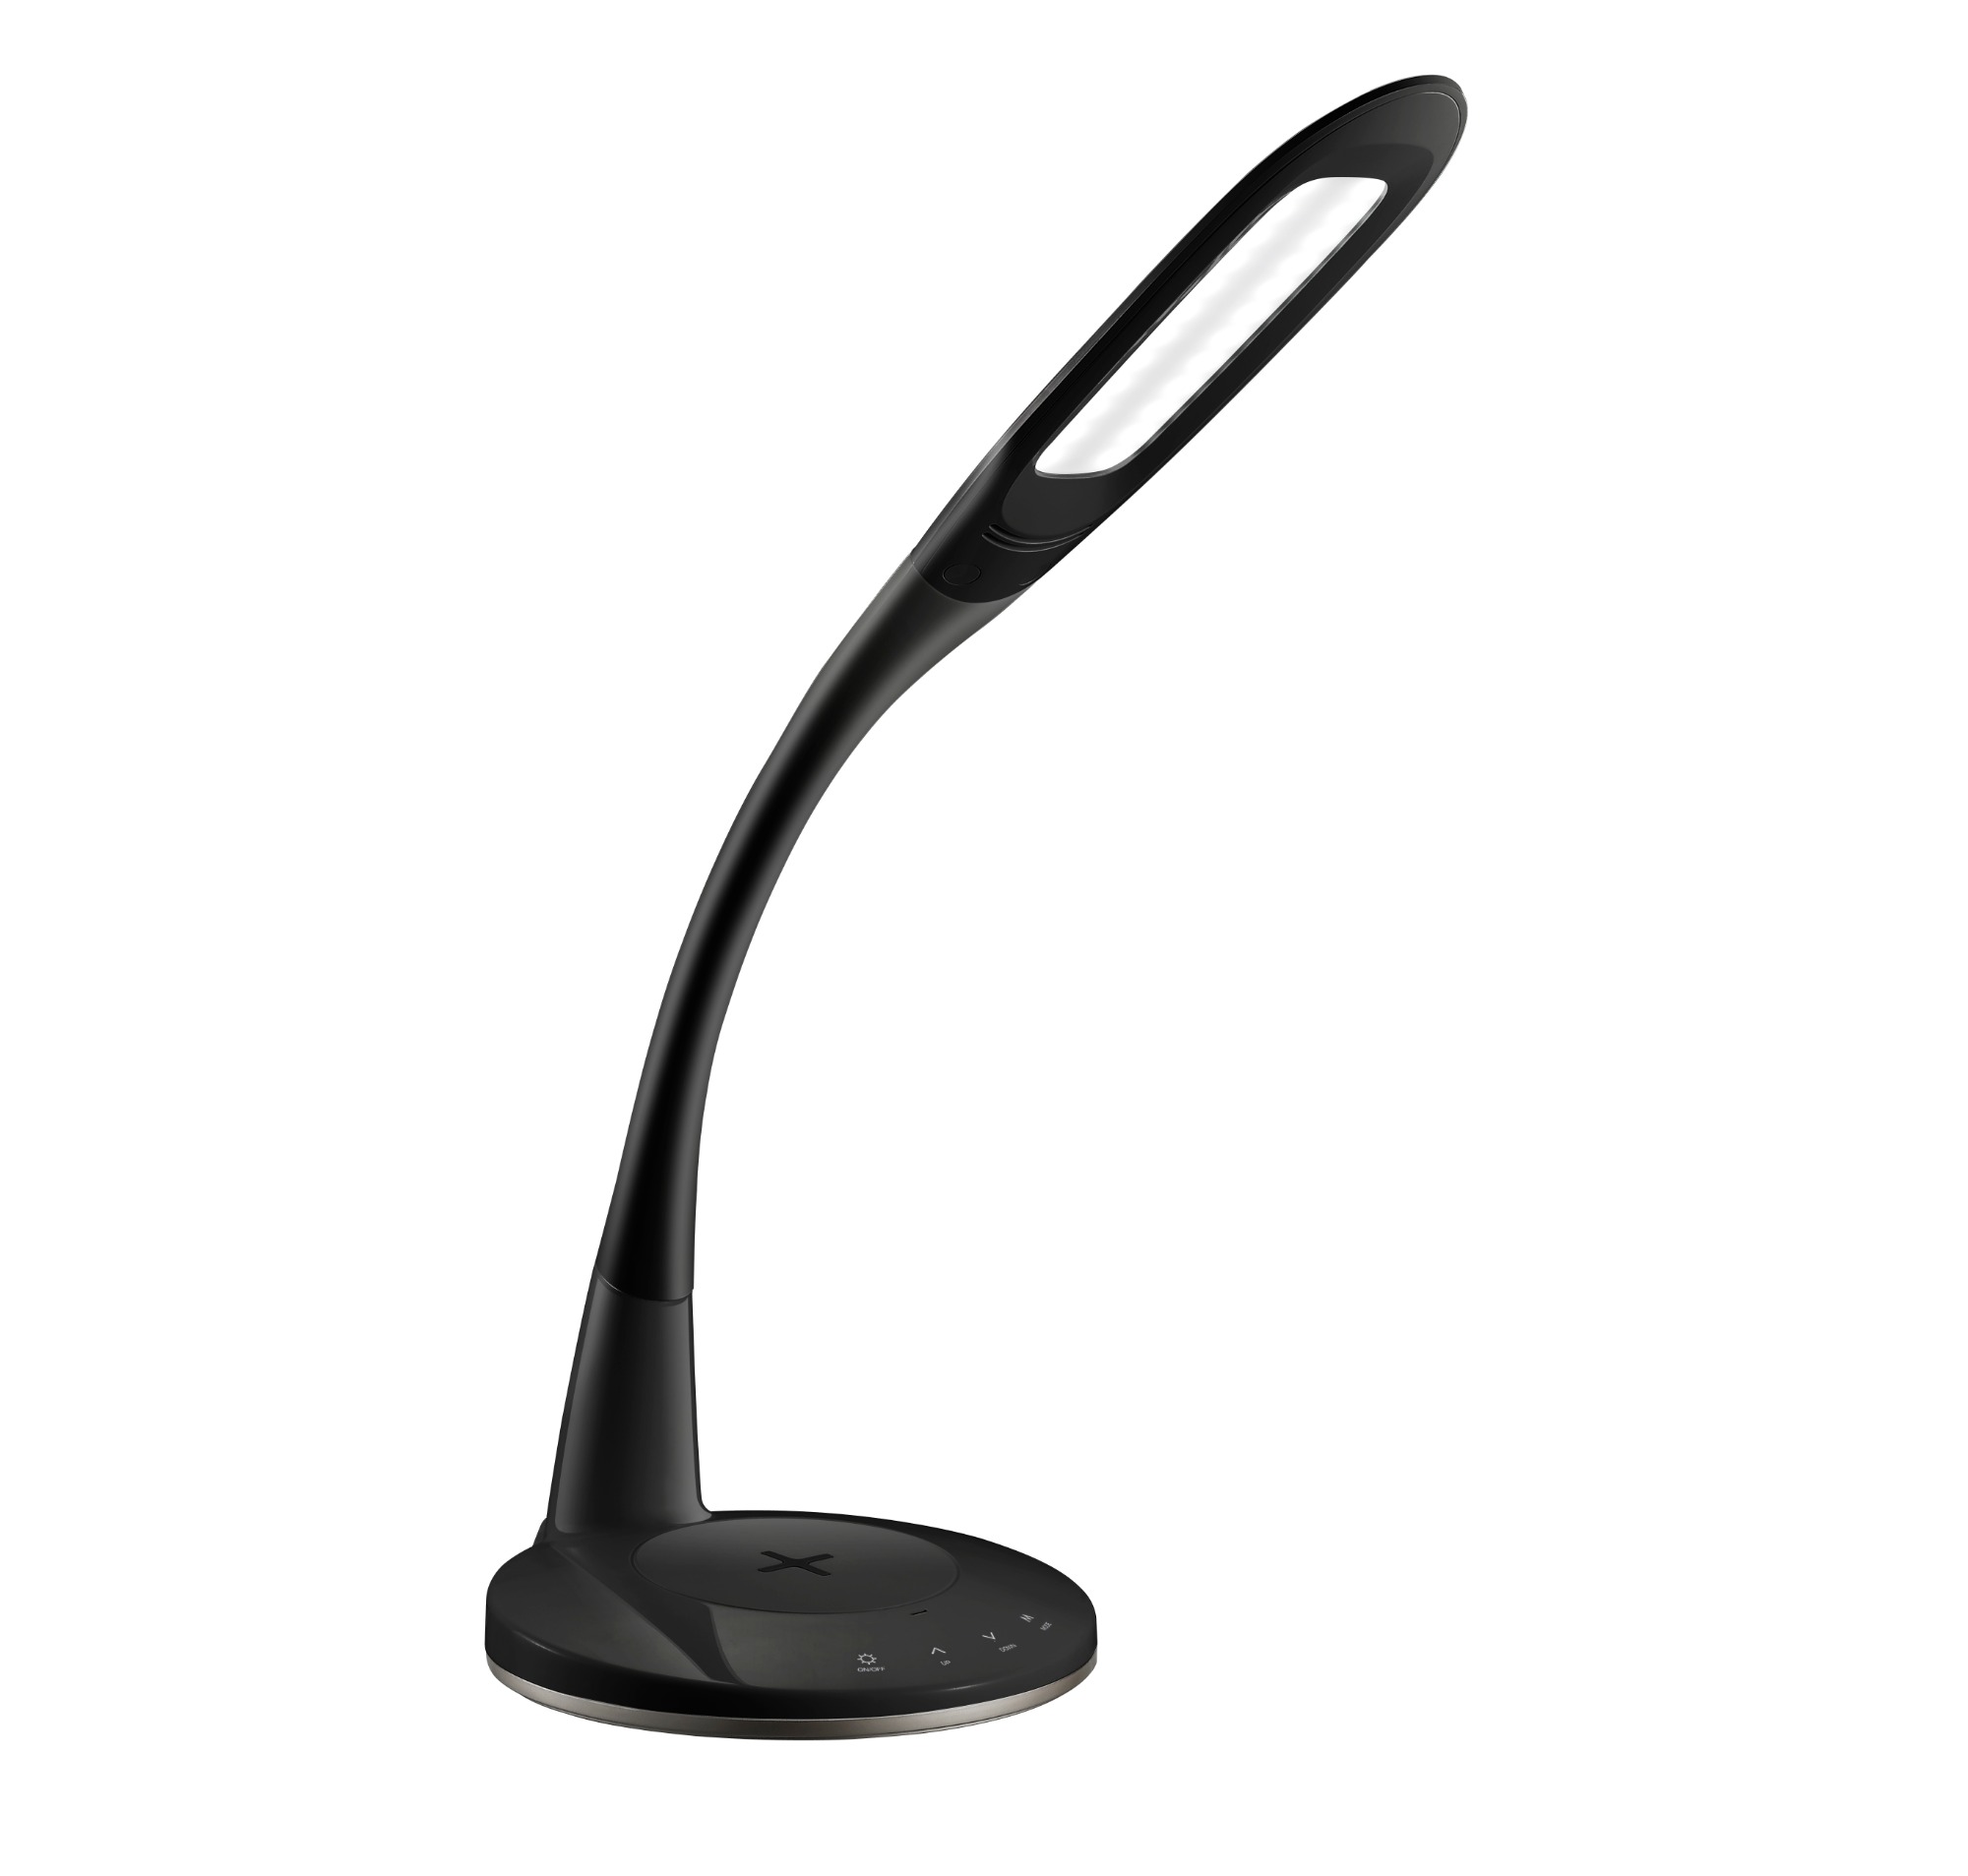 WILIT LED Table Lamp with Wireless Charger Q3Q - Table Lamp